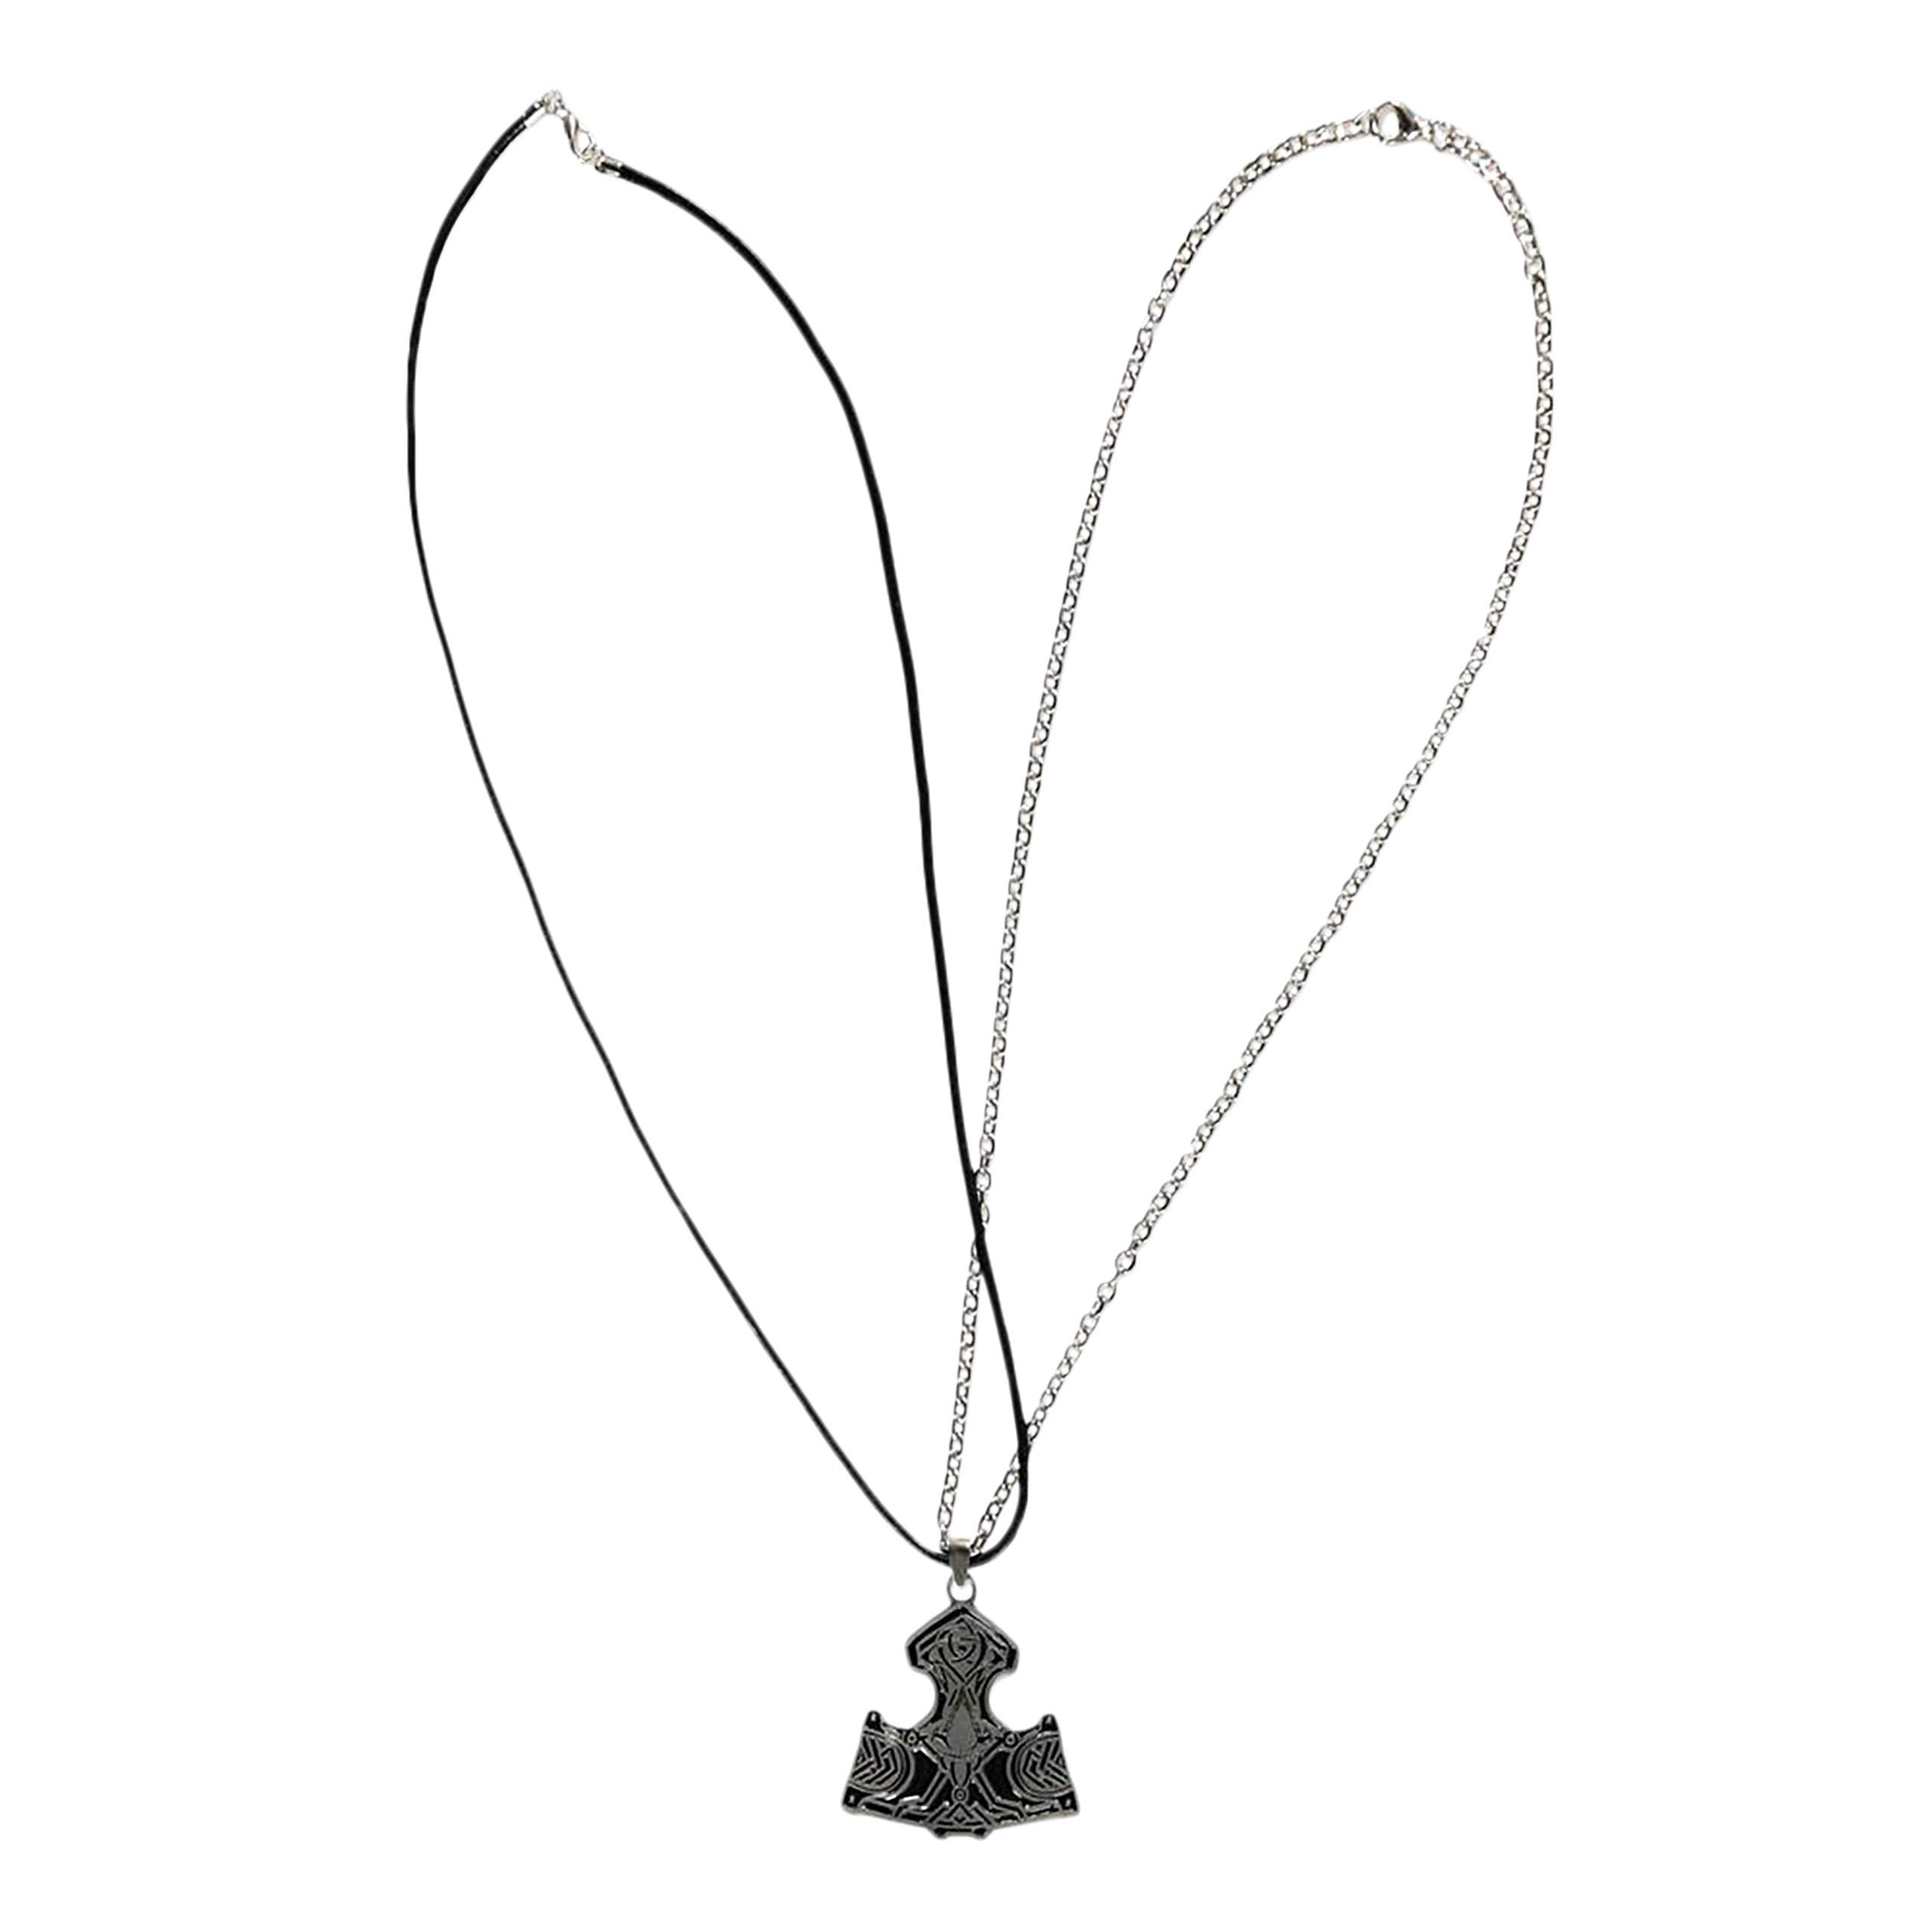 Assassin's Creed - Valhalla Thor's Hammer Necklace